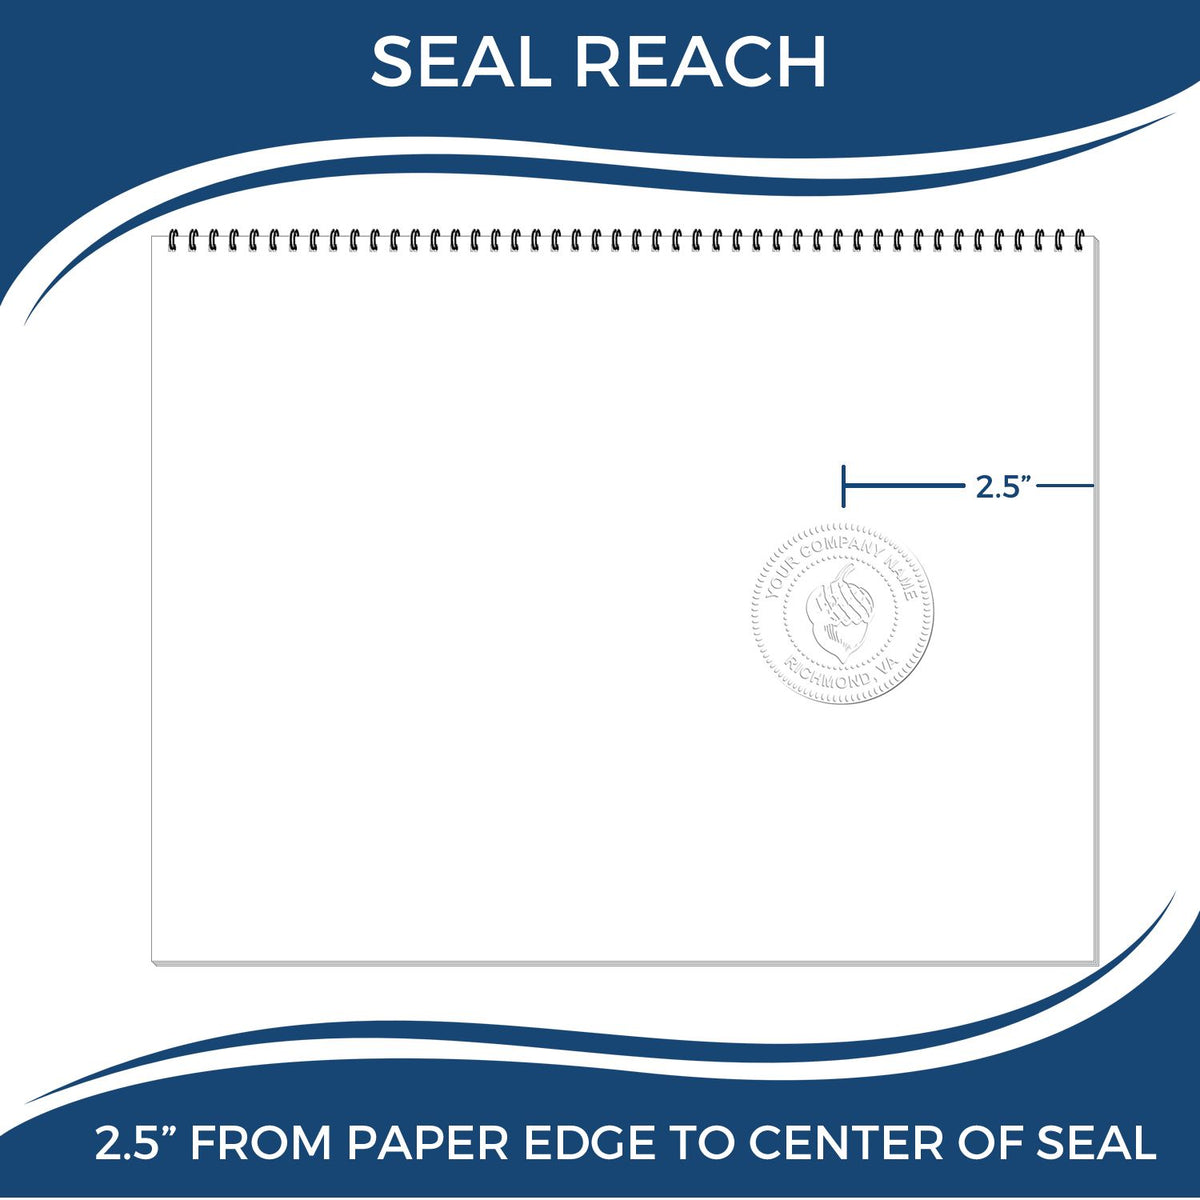 An infographic showing the seal reach which is represented by a ruler and a miniature seal image of the Long Reach Delaware Geology Seal